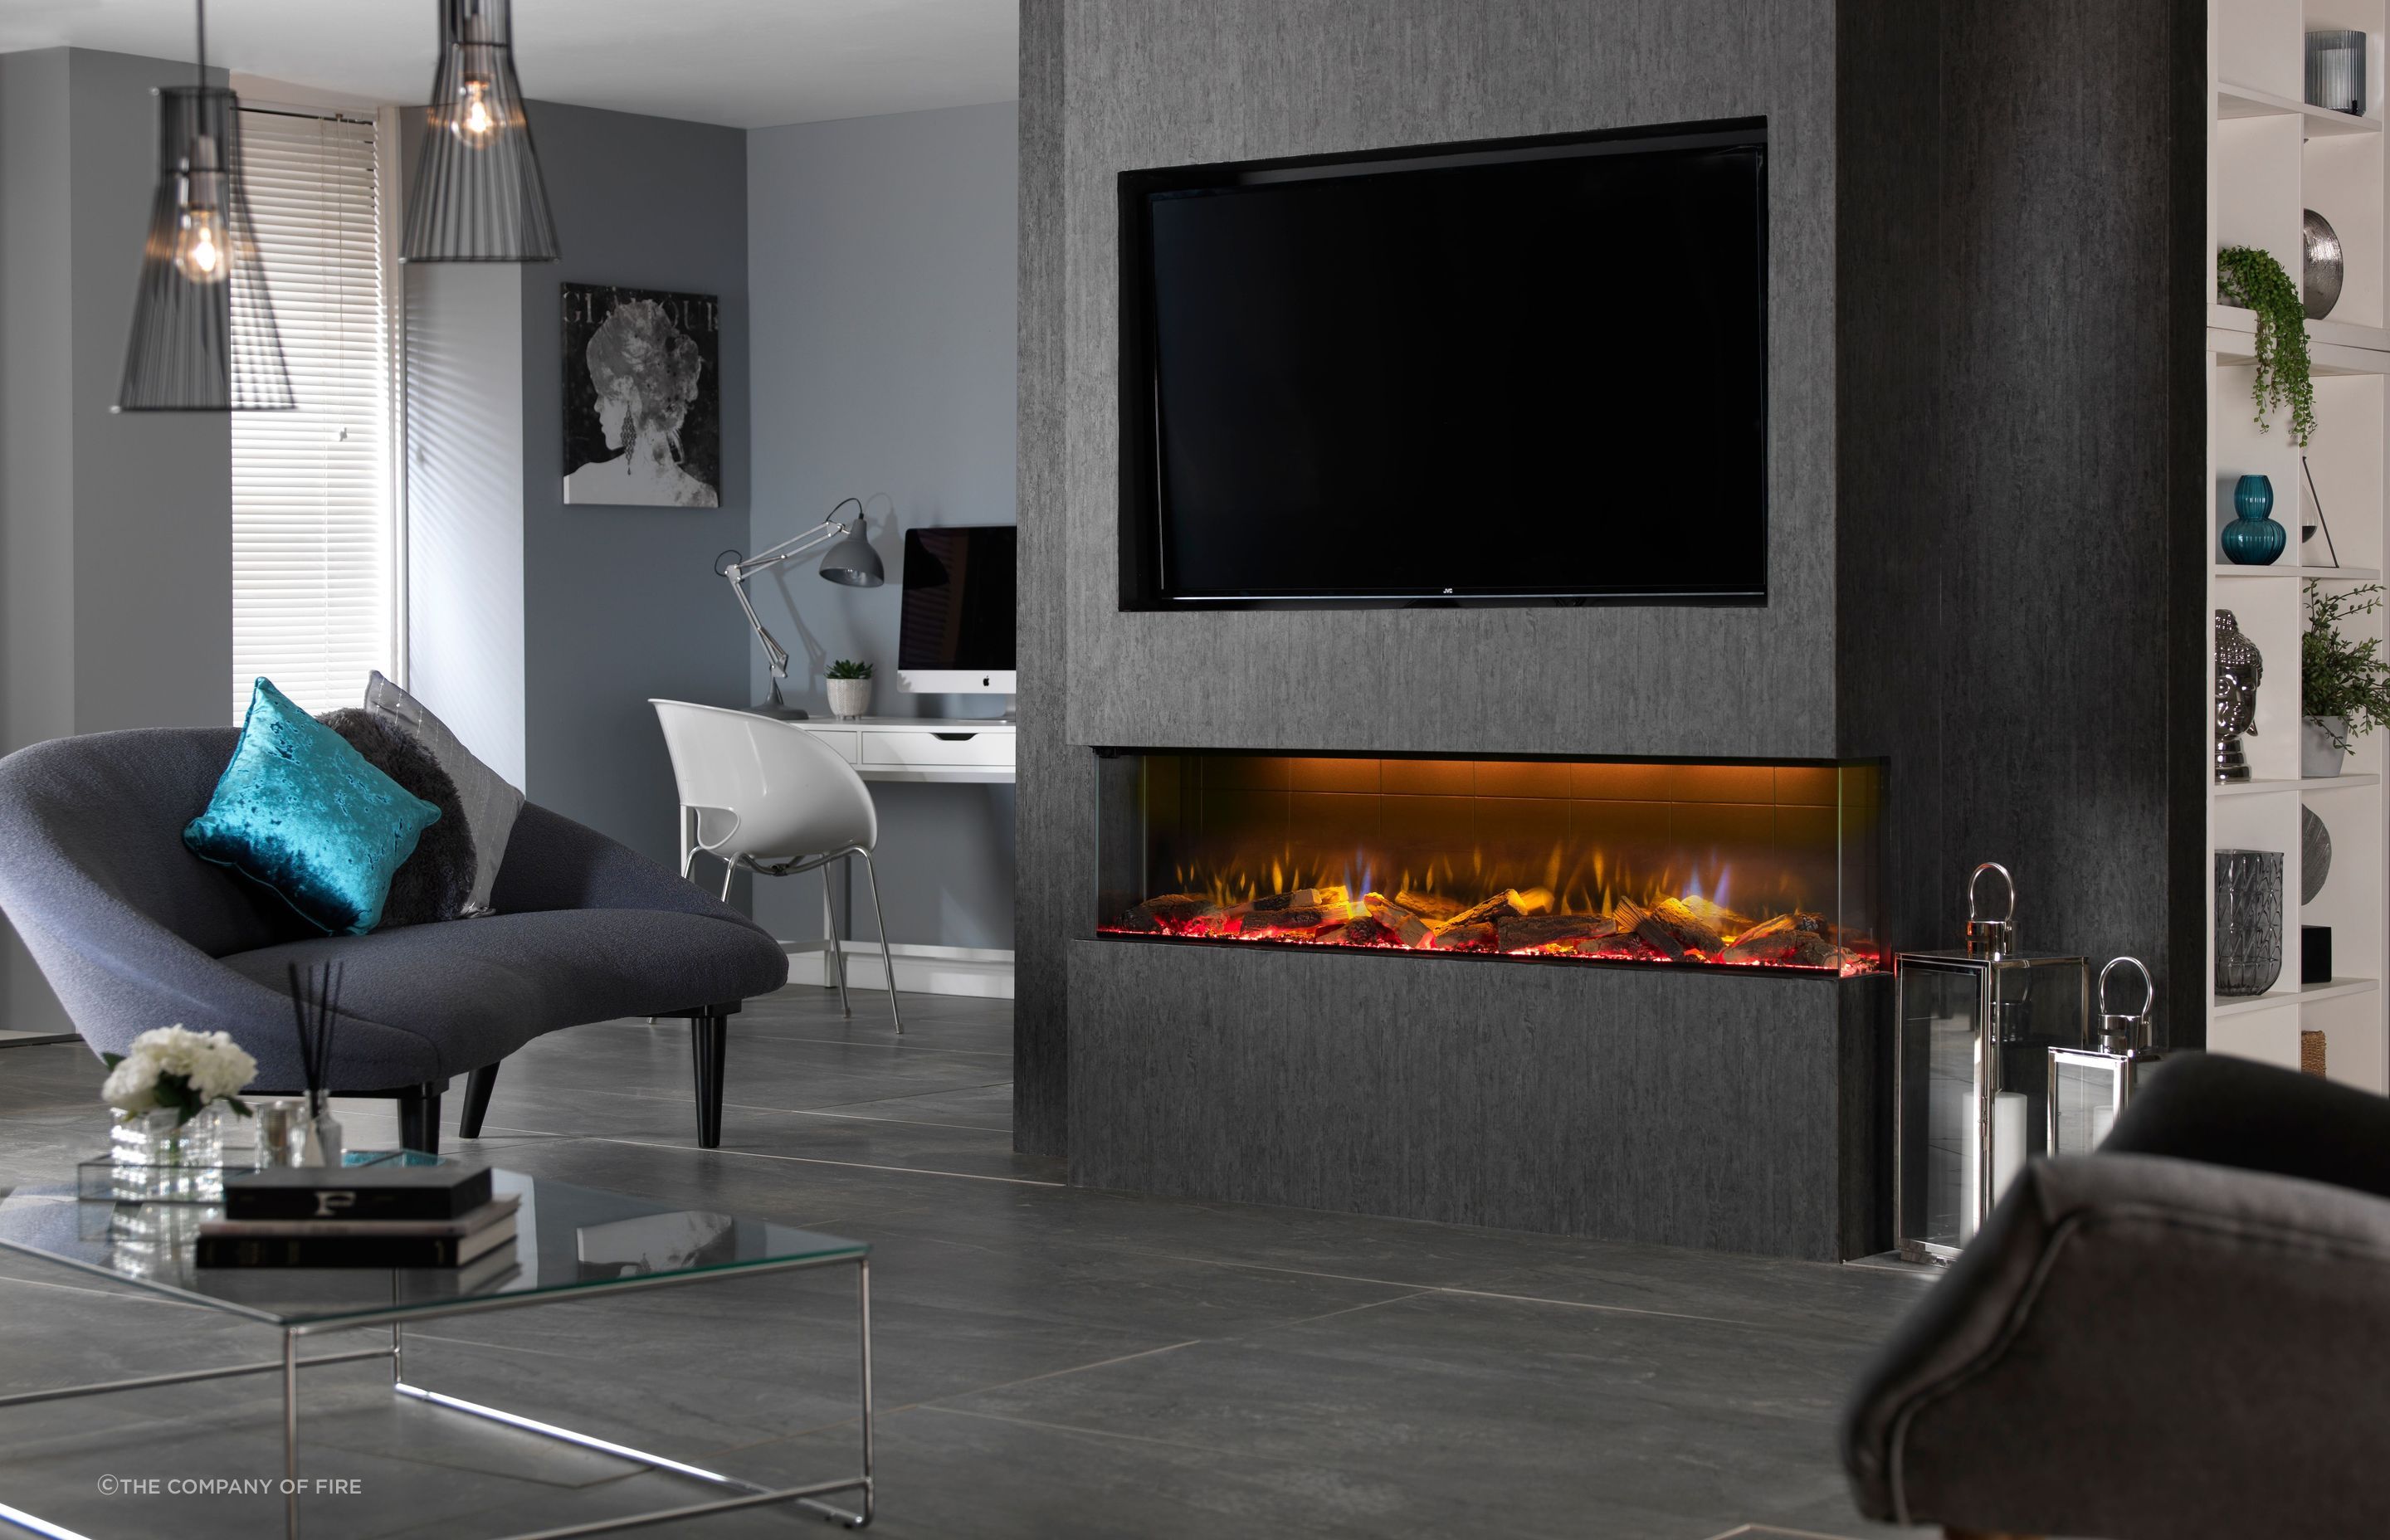 The Real Flame Vivente Electric Fireplace looks stunning in this modern living room.